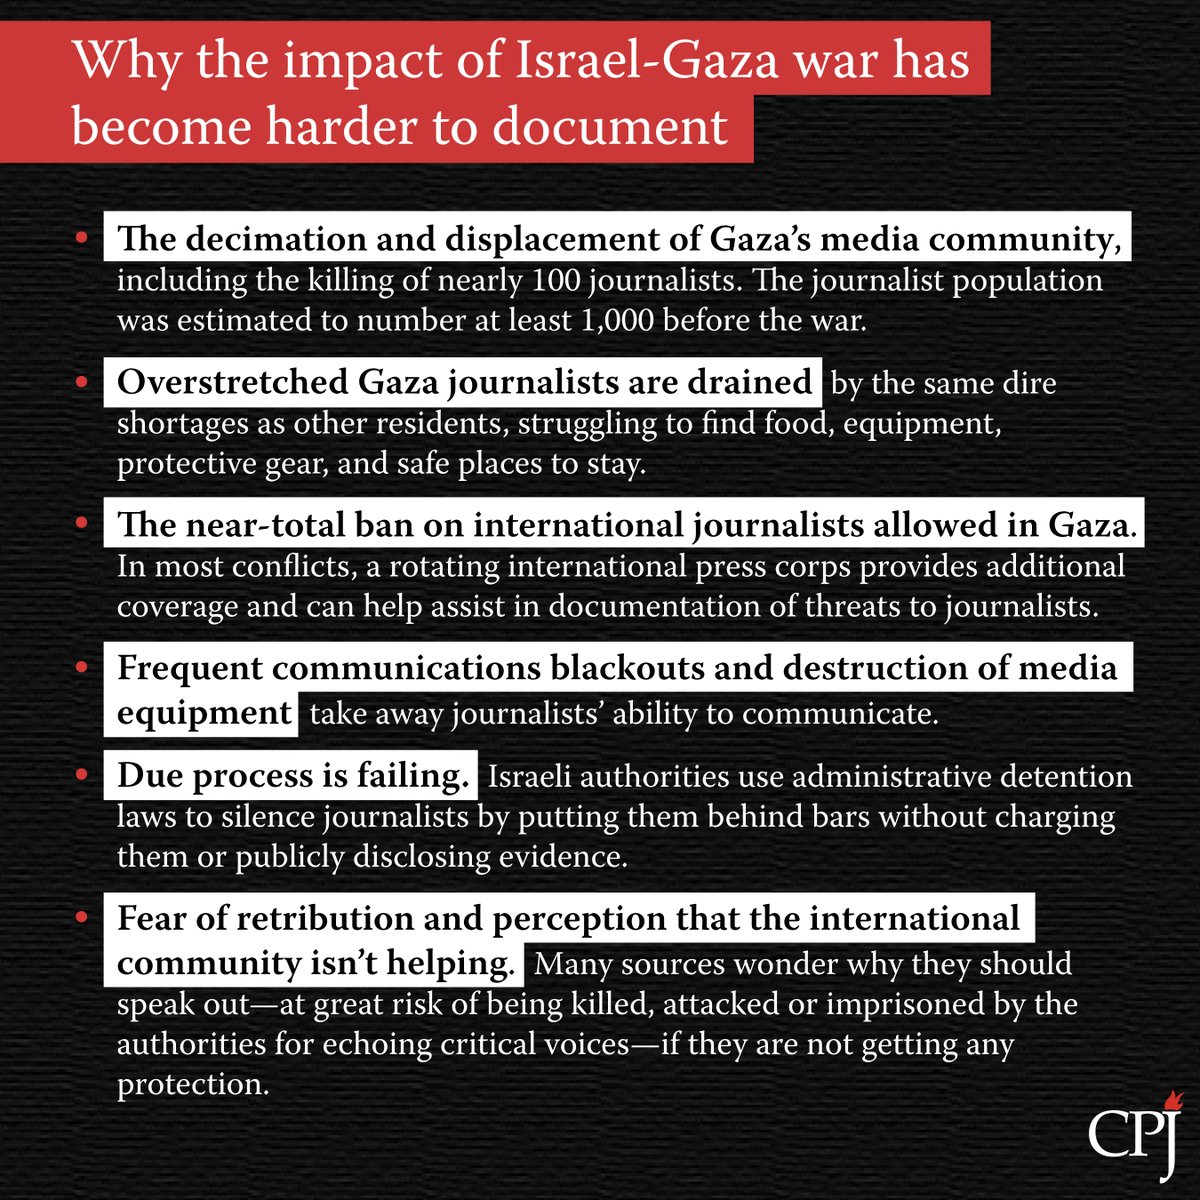 With so many Palestinian journalists killed, in exile, or physically and psychologically depleted after months of reporting and living in a conflict zone, and no international media present within Gaza either, it has become exponentially harder to document the broader impact of…